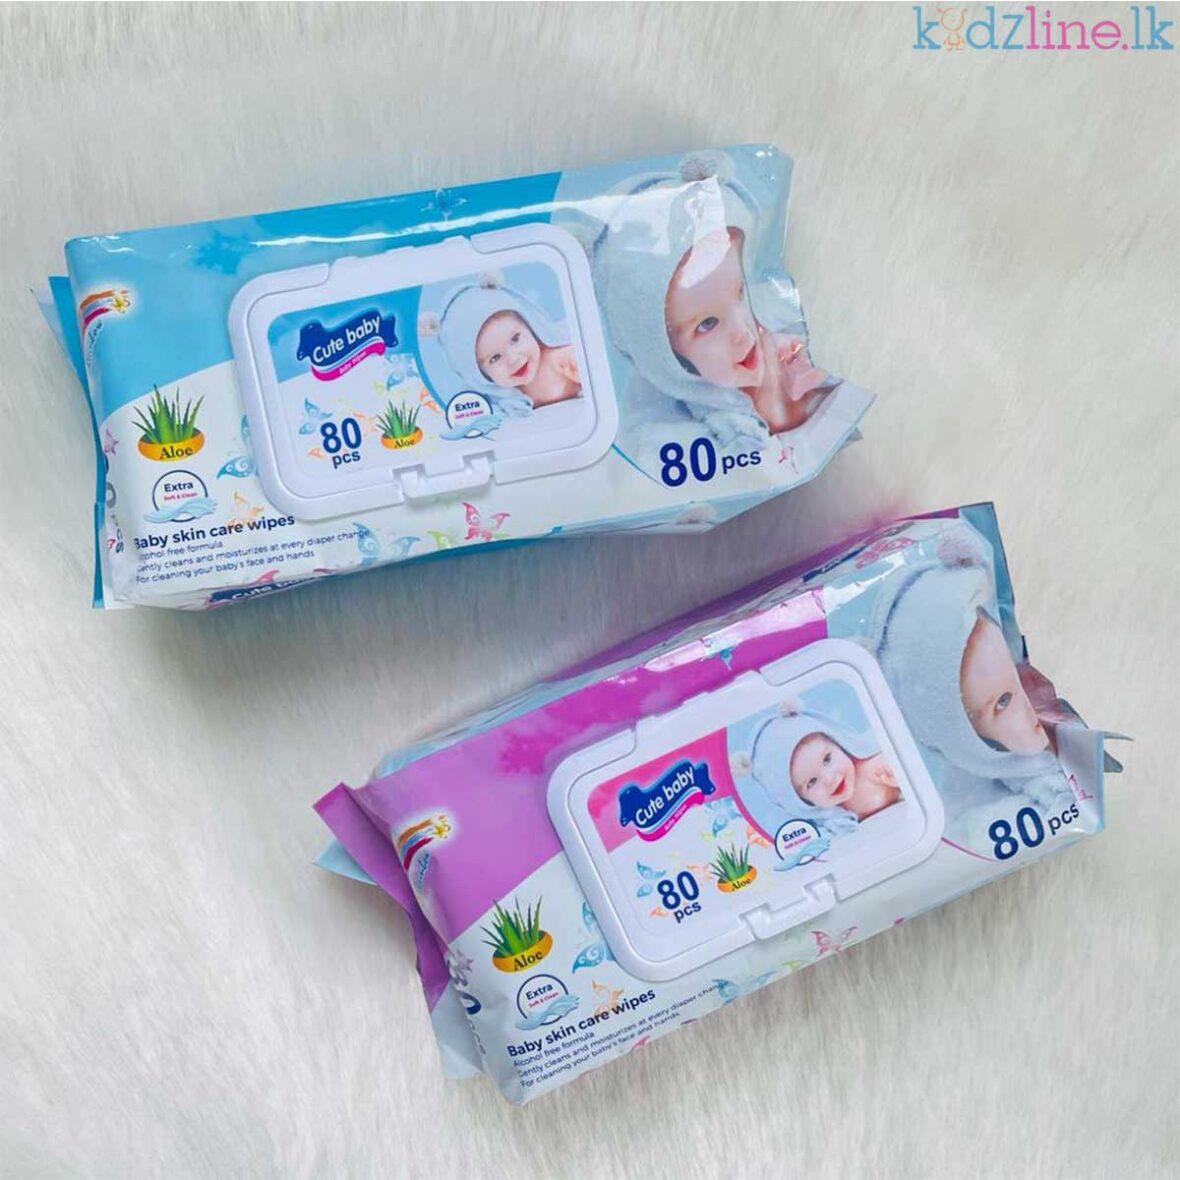 80 Pcs Baby Skin Care Wipes